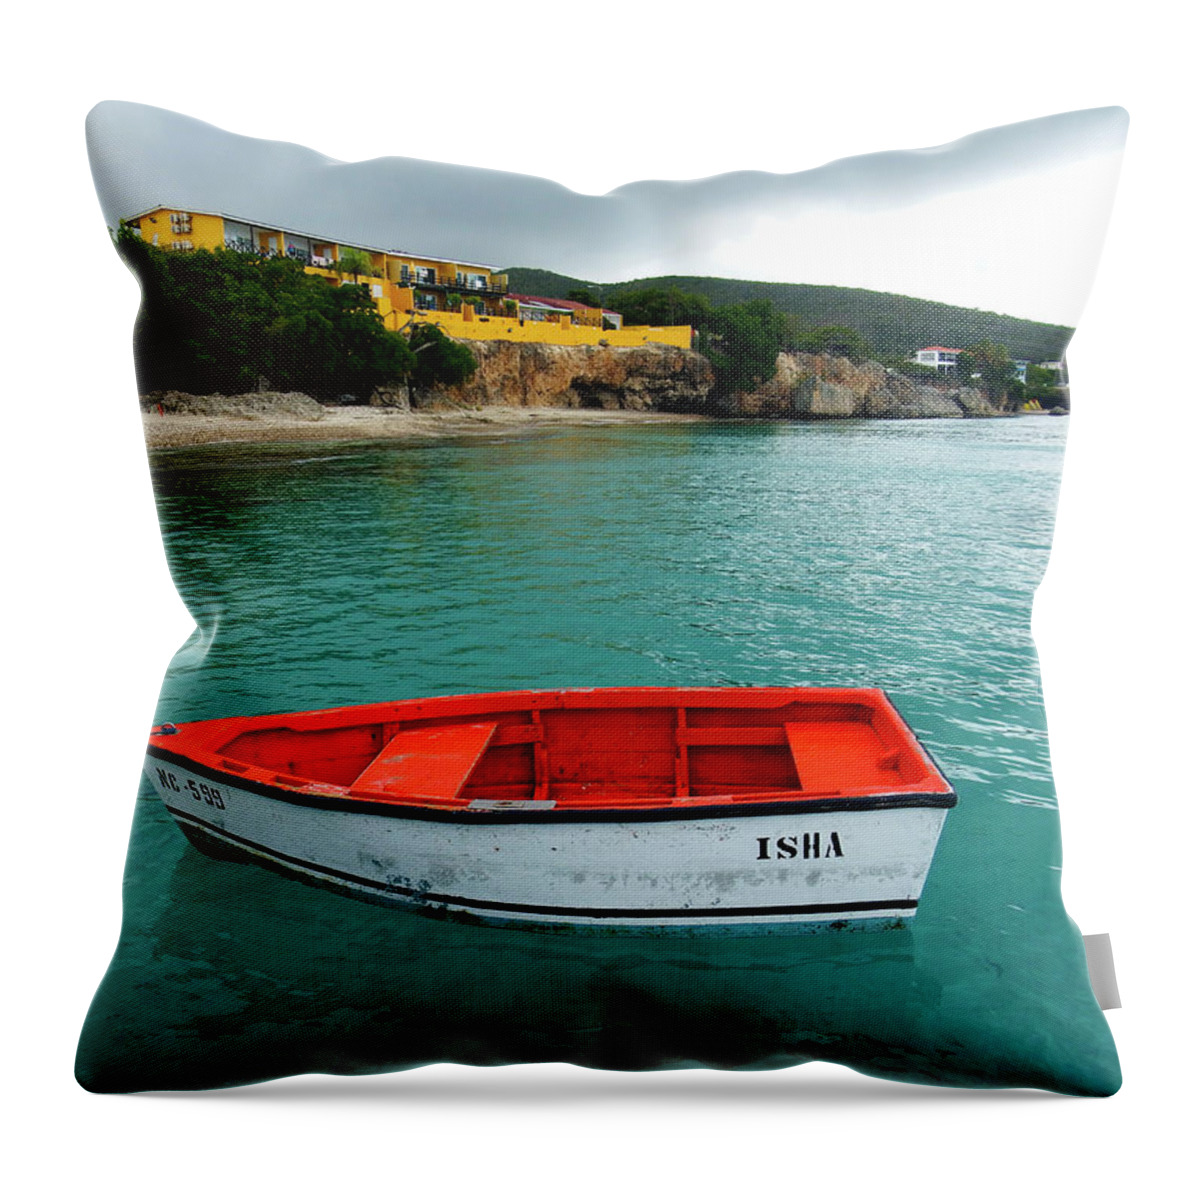 Boat Throw Pillow featuring the photograph Isha by Kurt Van Wagner